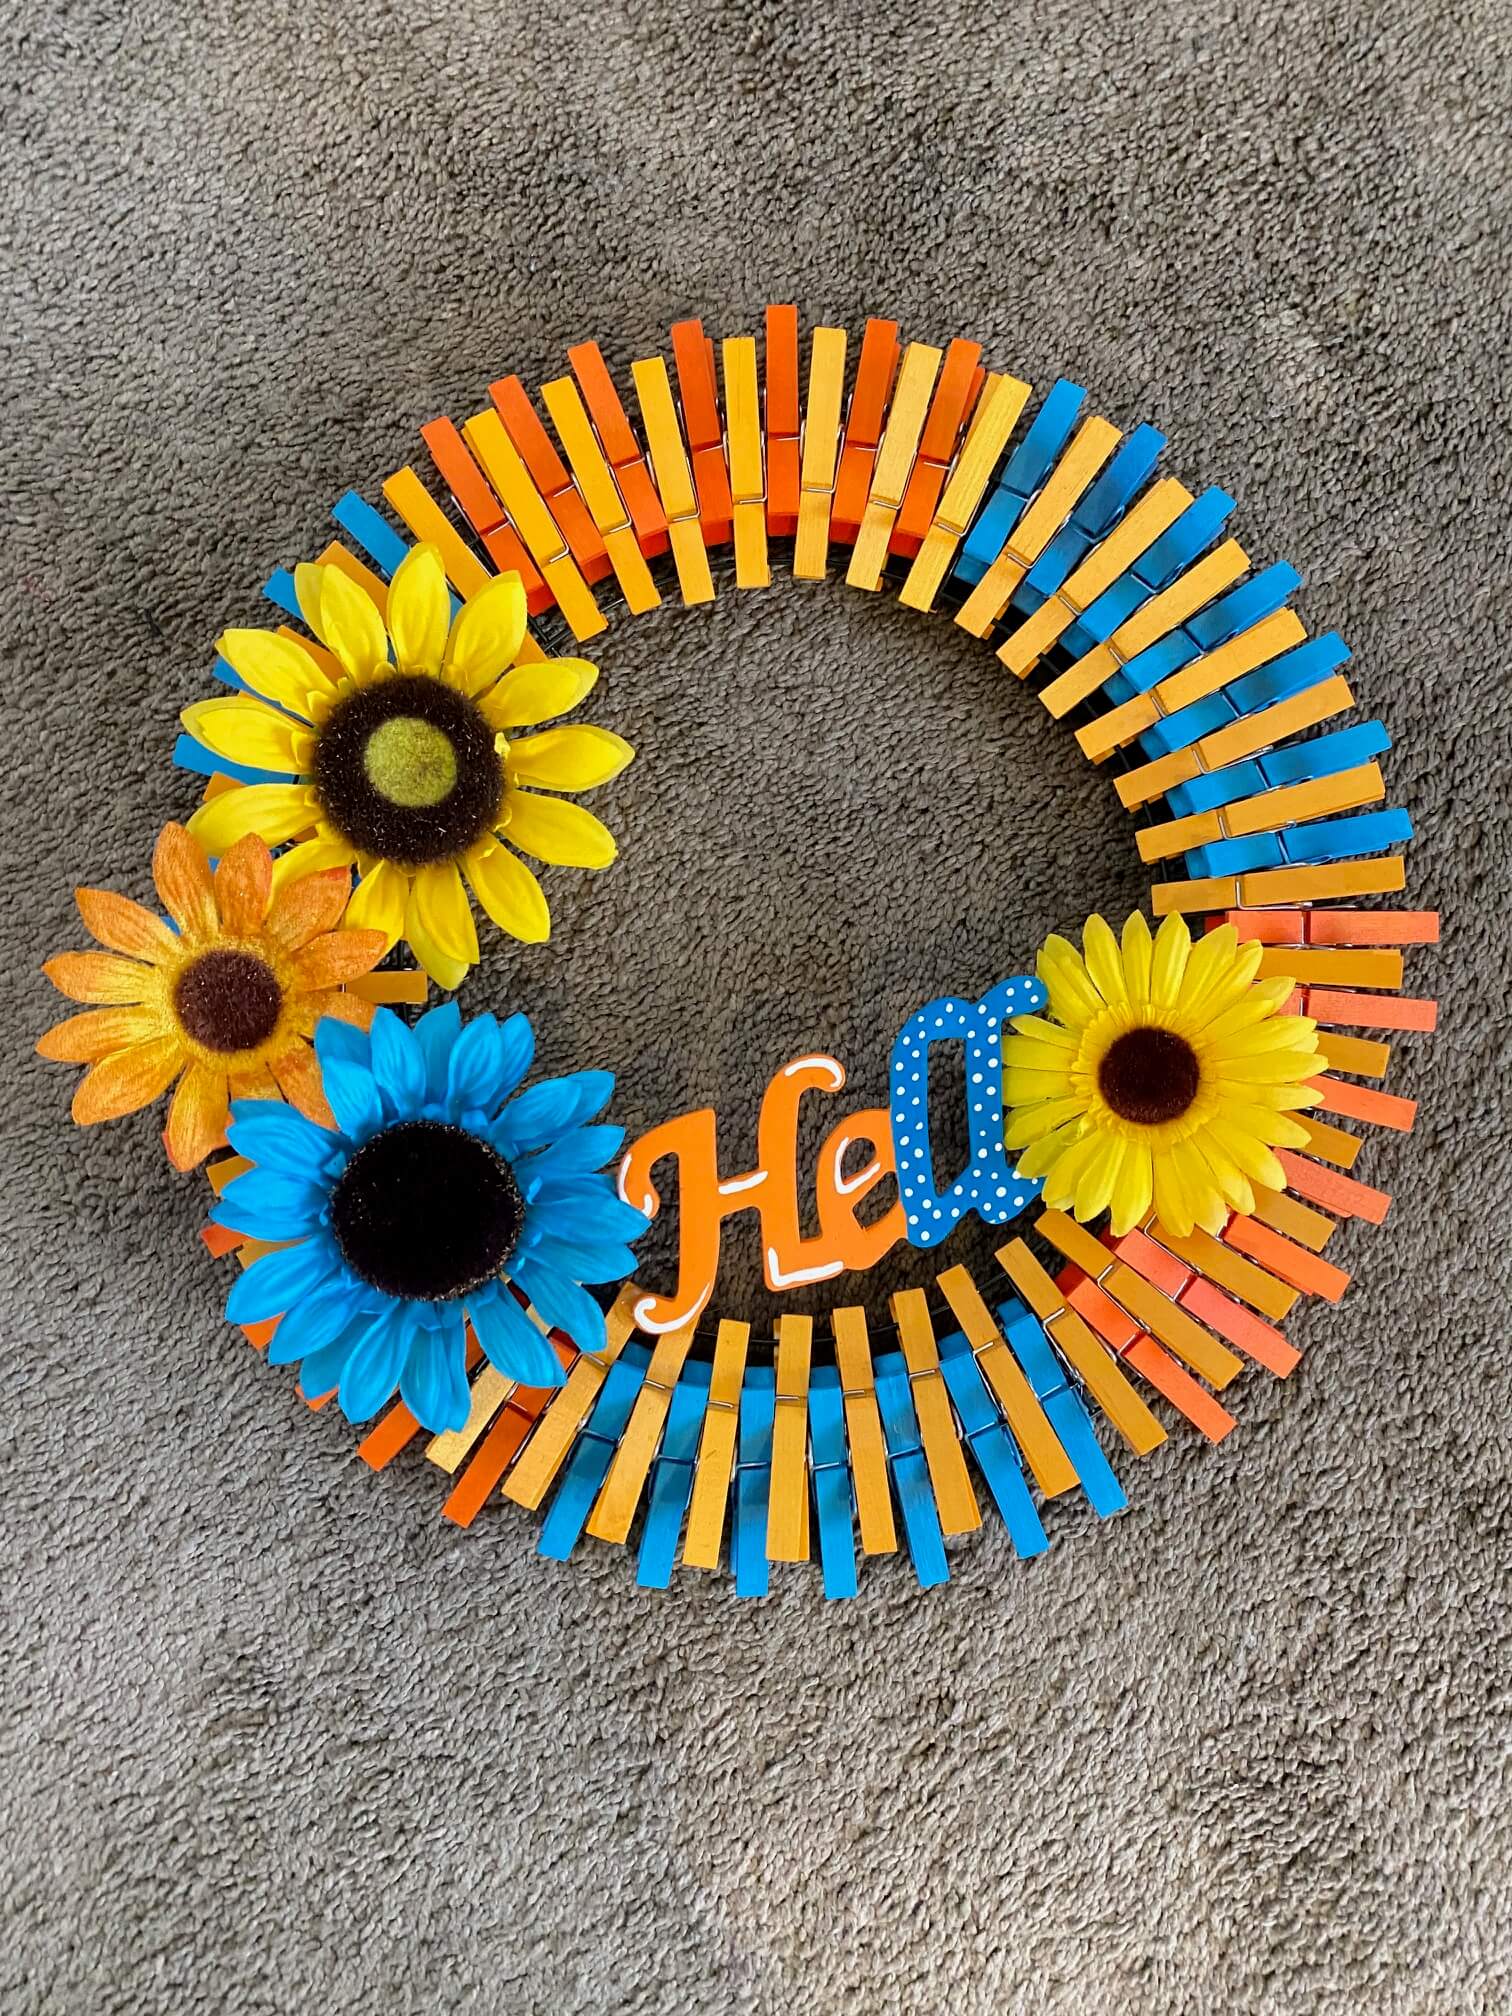 Use plenty of hot glue to secure the sign across the bottom of the wreath.  If you'd like, you can add a smaller sunflower to the 